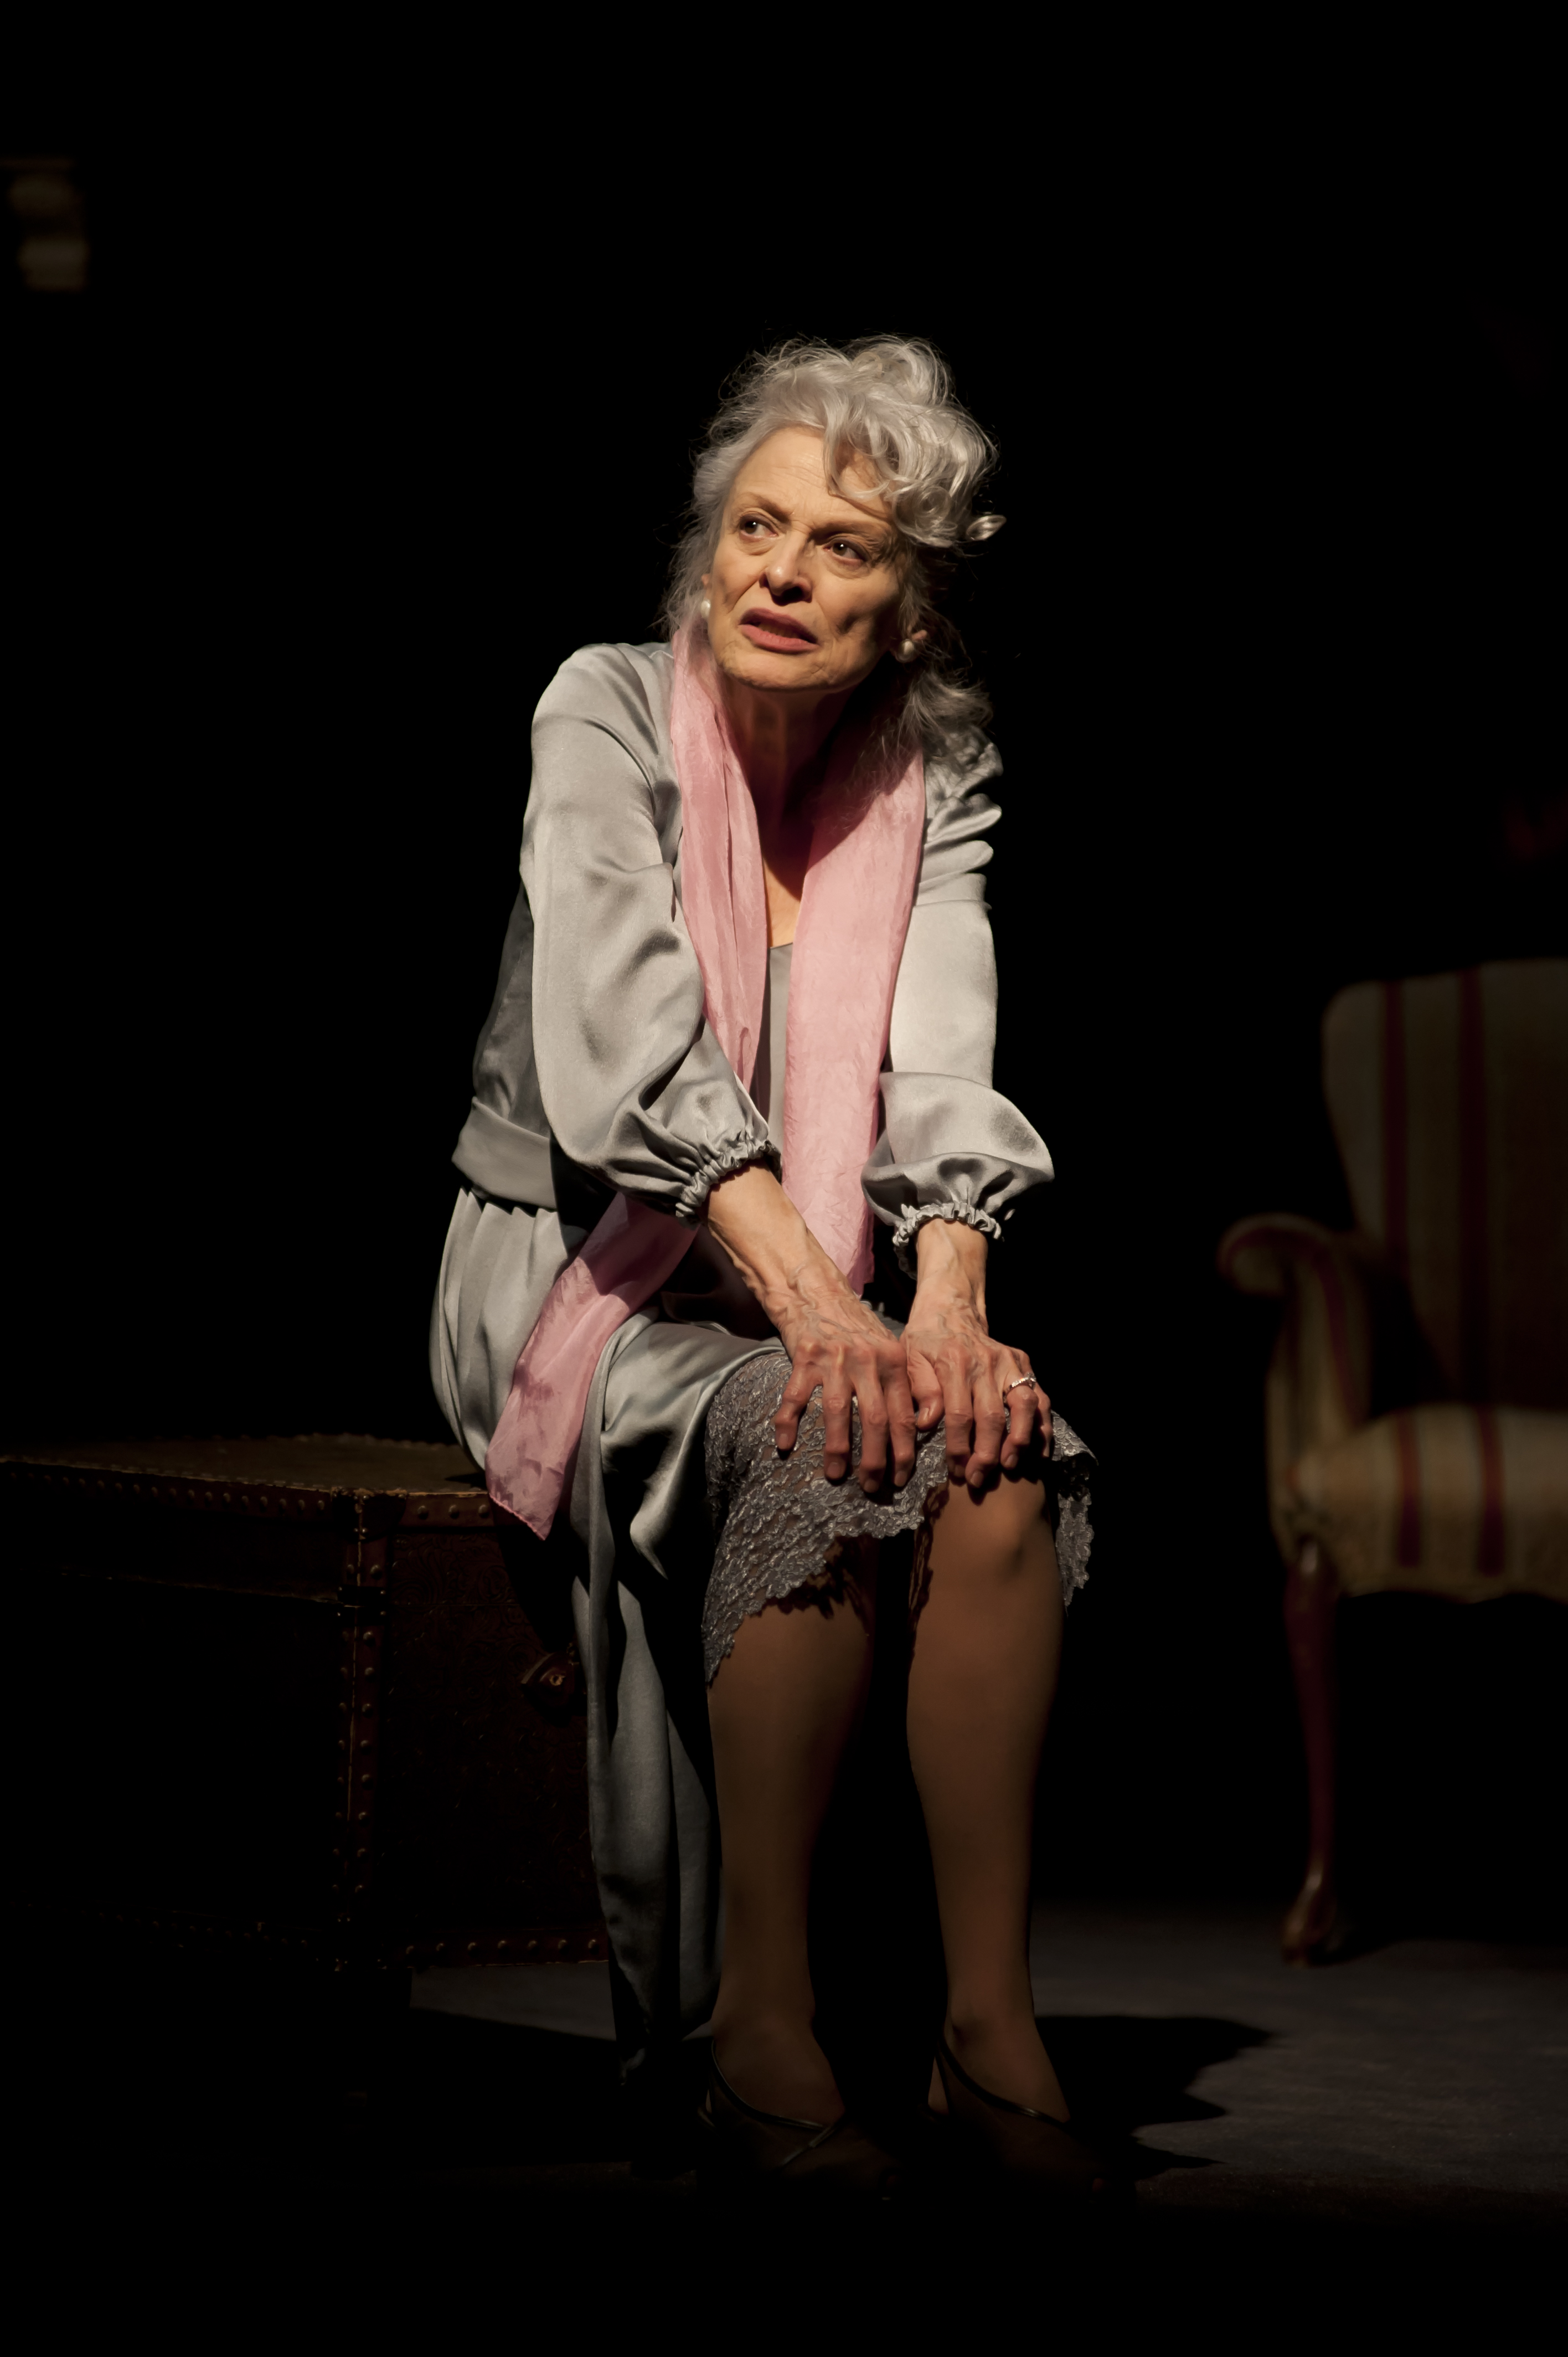 Judith roberts is an actress, known for lake mungo (2008), blue heelers (19...